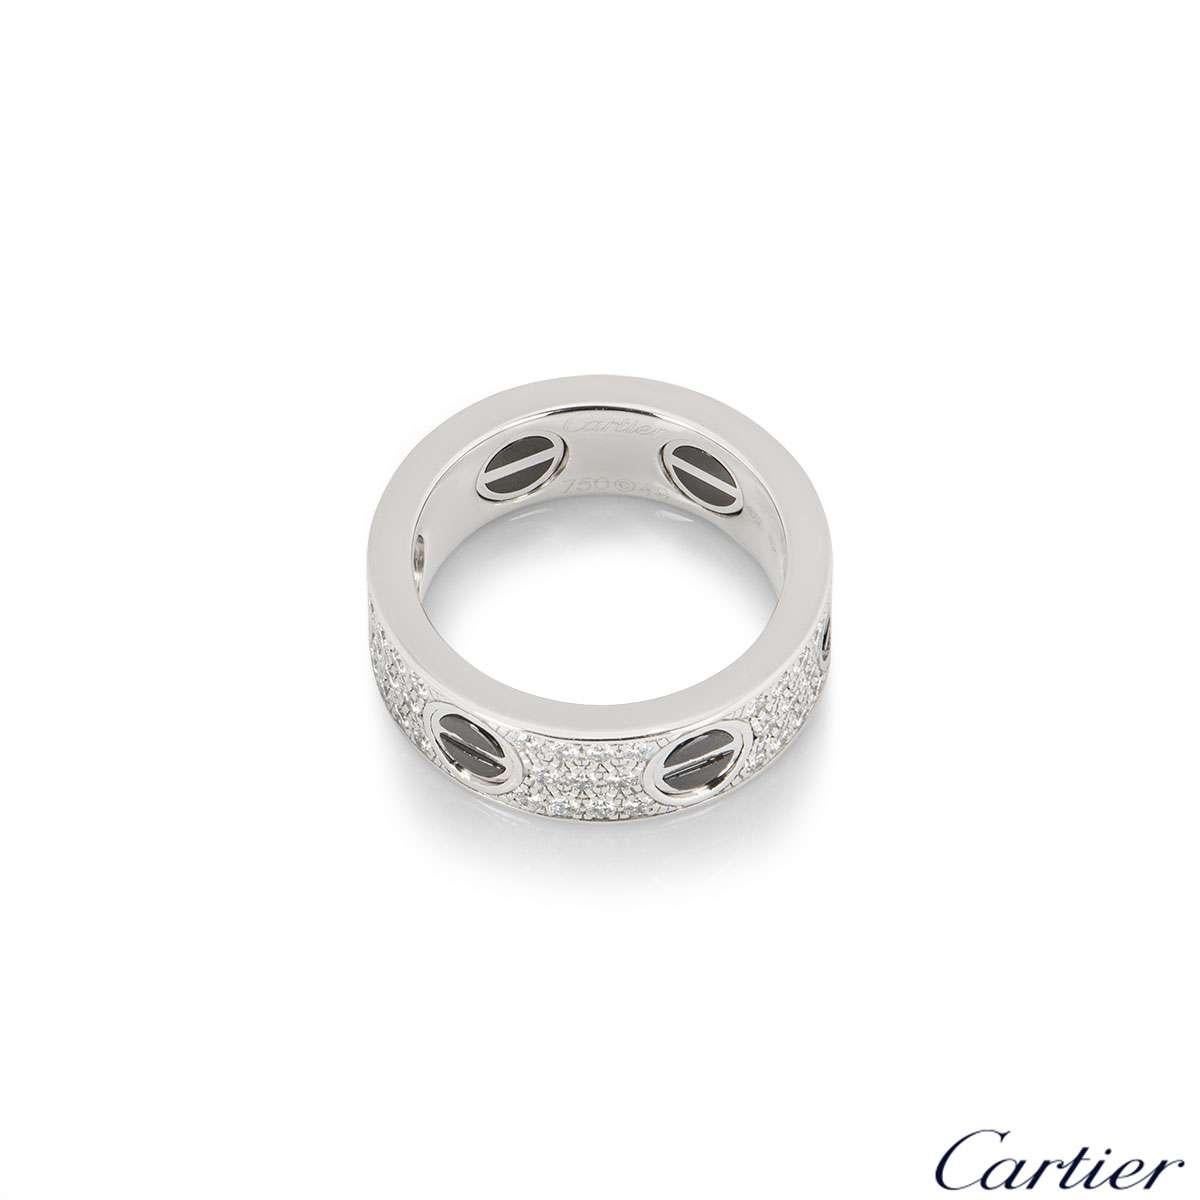 Round Cut Cartier Diamond and Ceramic Love Band Ring